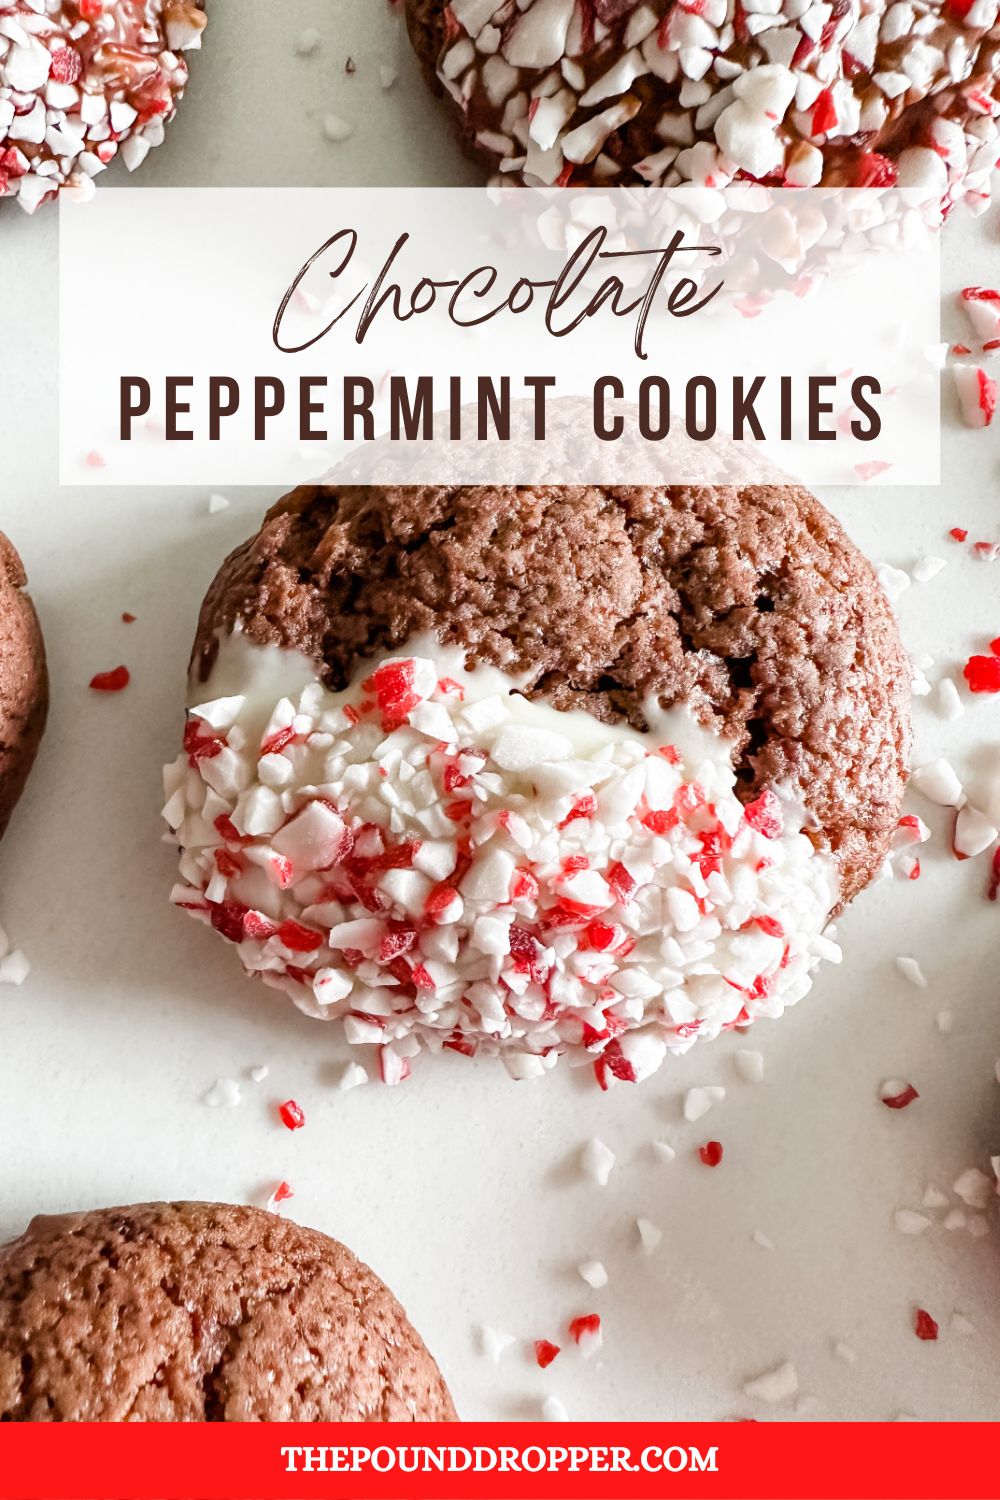 Chocolate Peppermint Cookies via @pounddropper